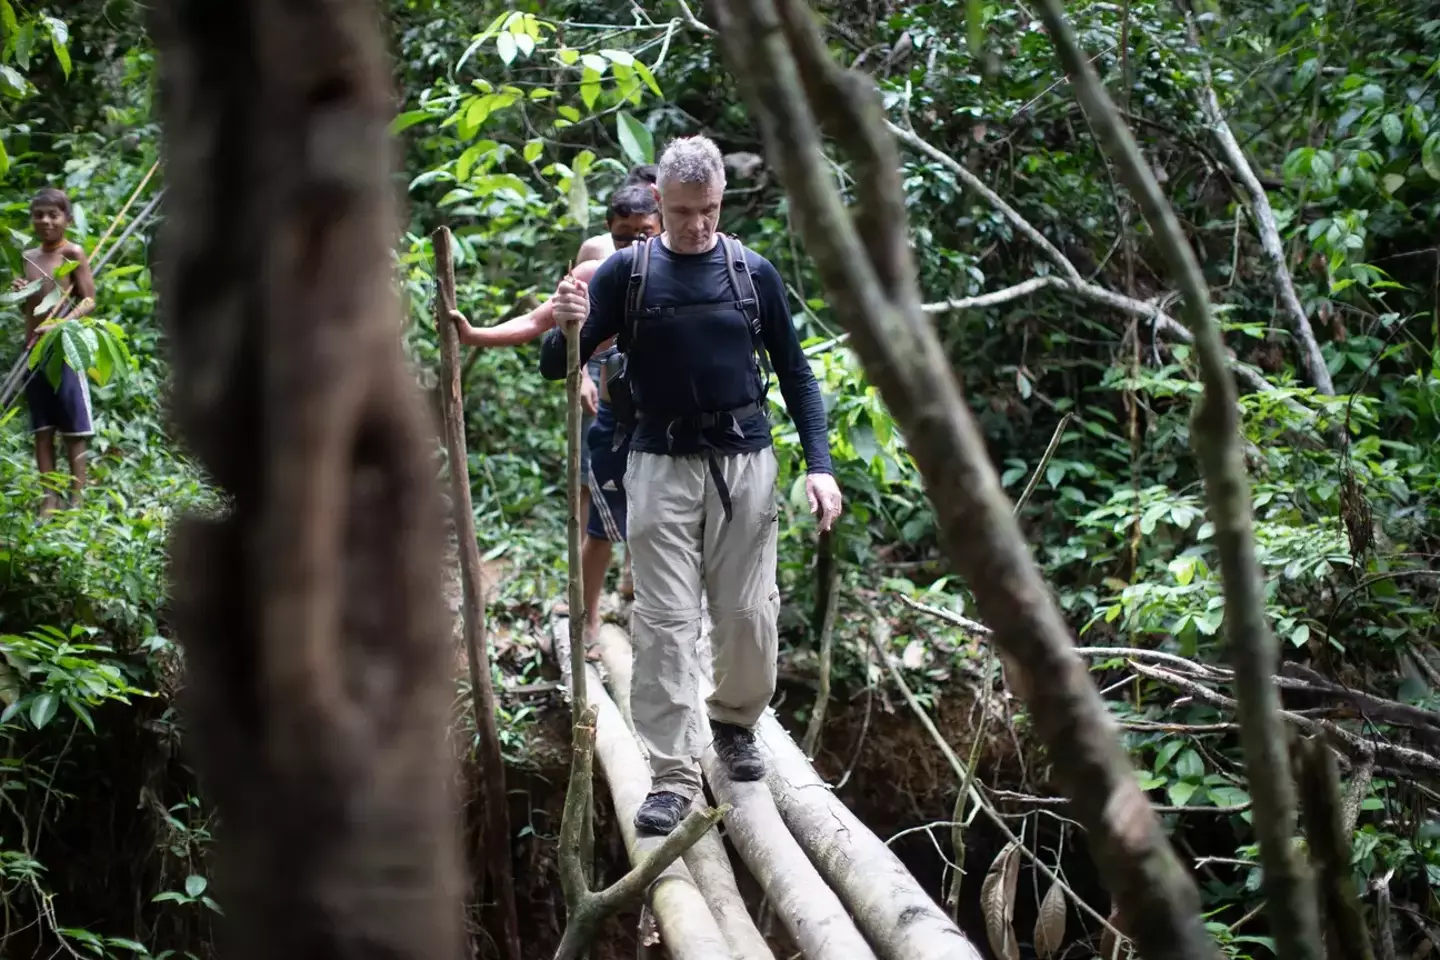 Human remains have been found in the search for Dom Phillips in the Amazon rainforest.